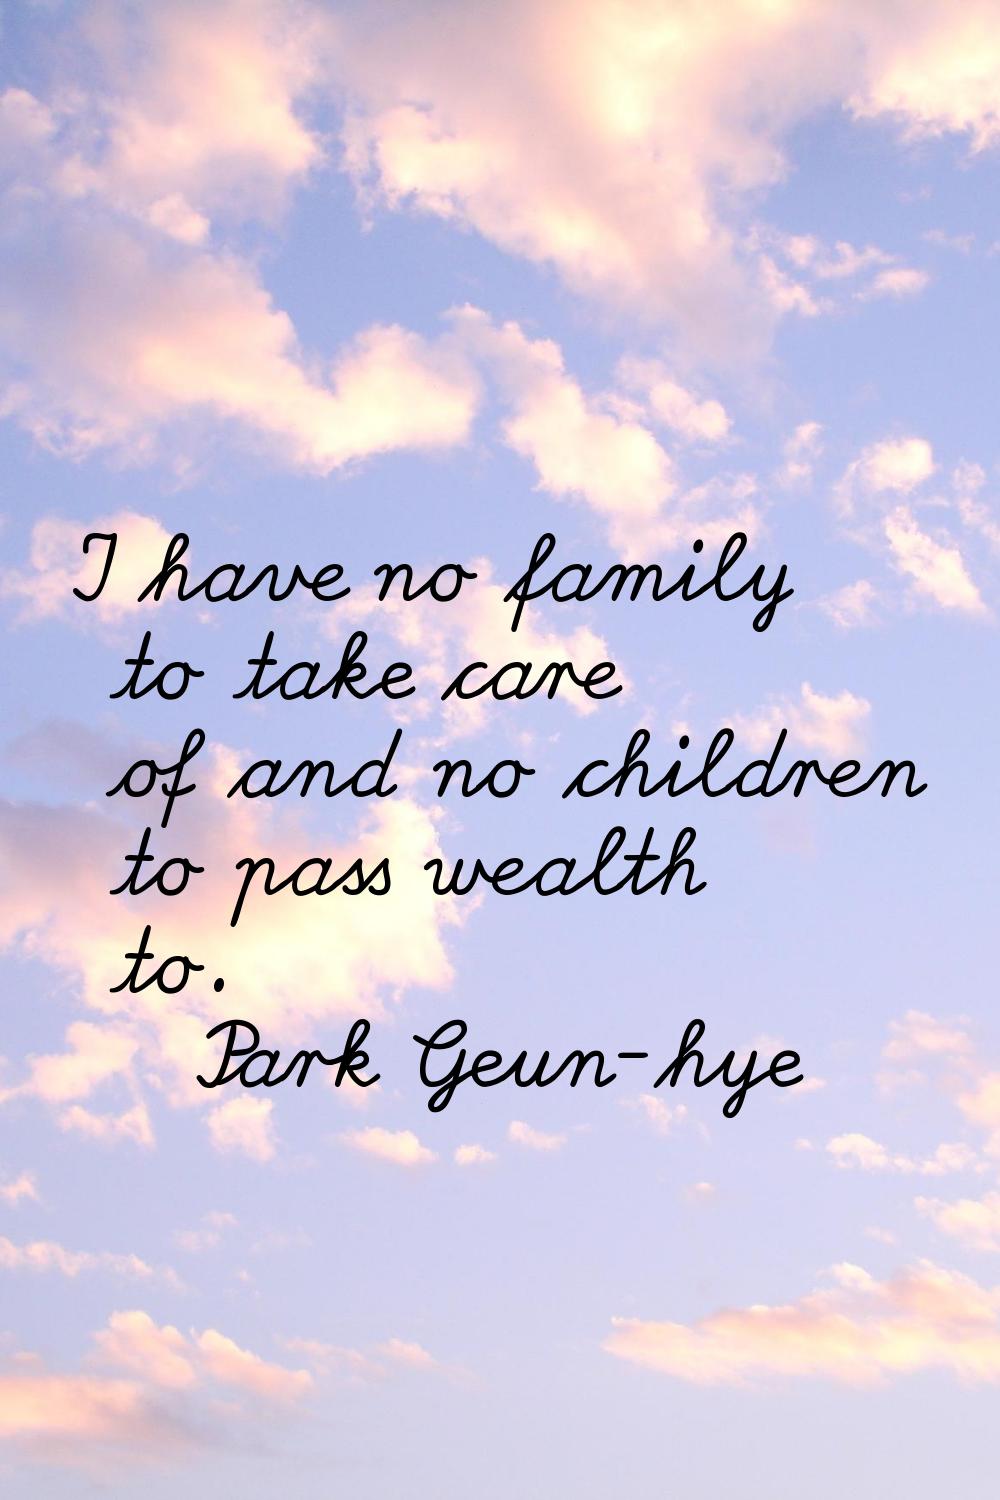 I have no family to take care of and no children to pass wealth to.